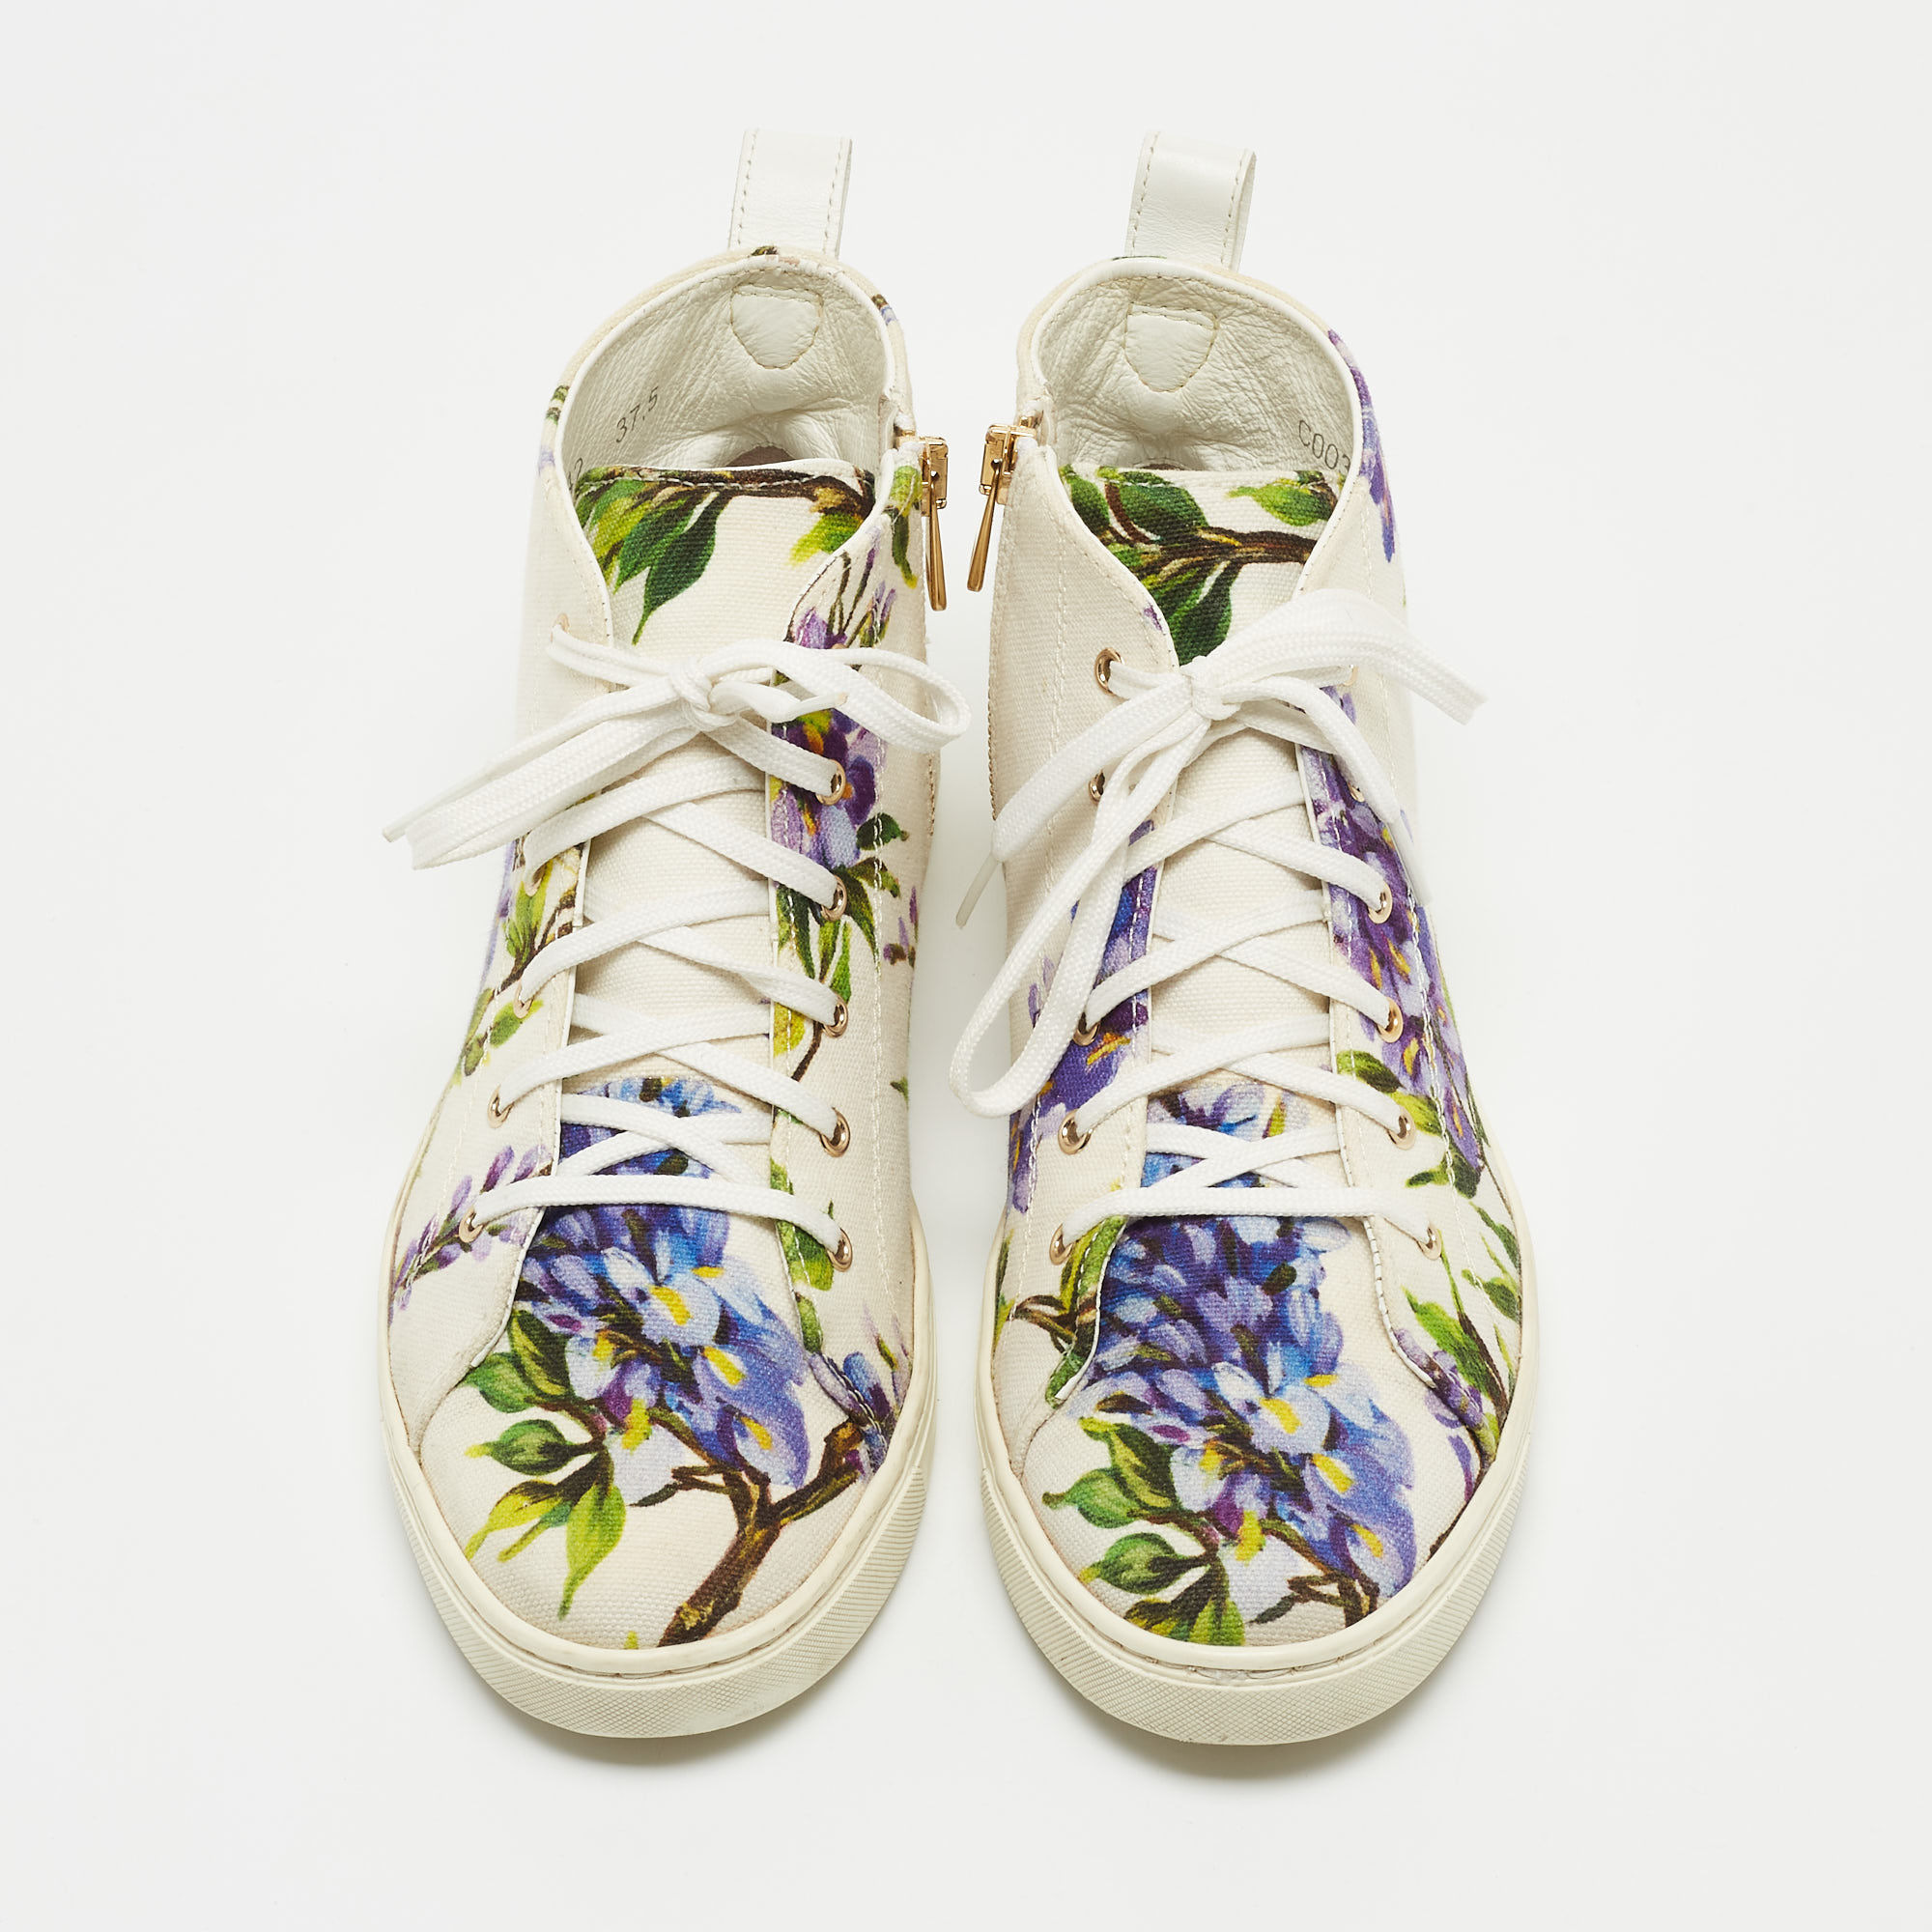 Dolce & Gabbana White Floral Print Canvas High Top Sneakers Size 37.5